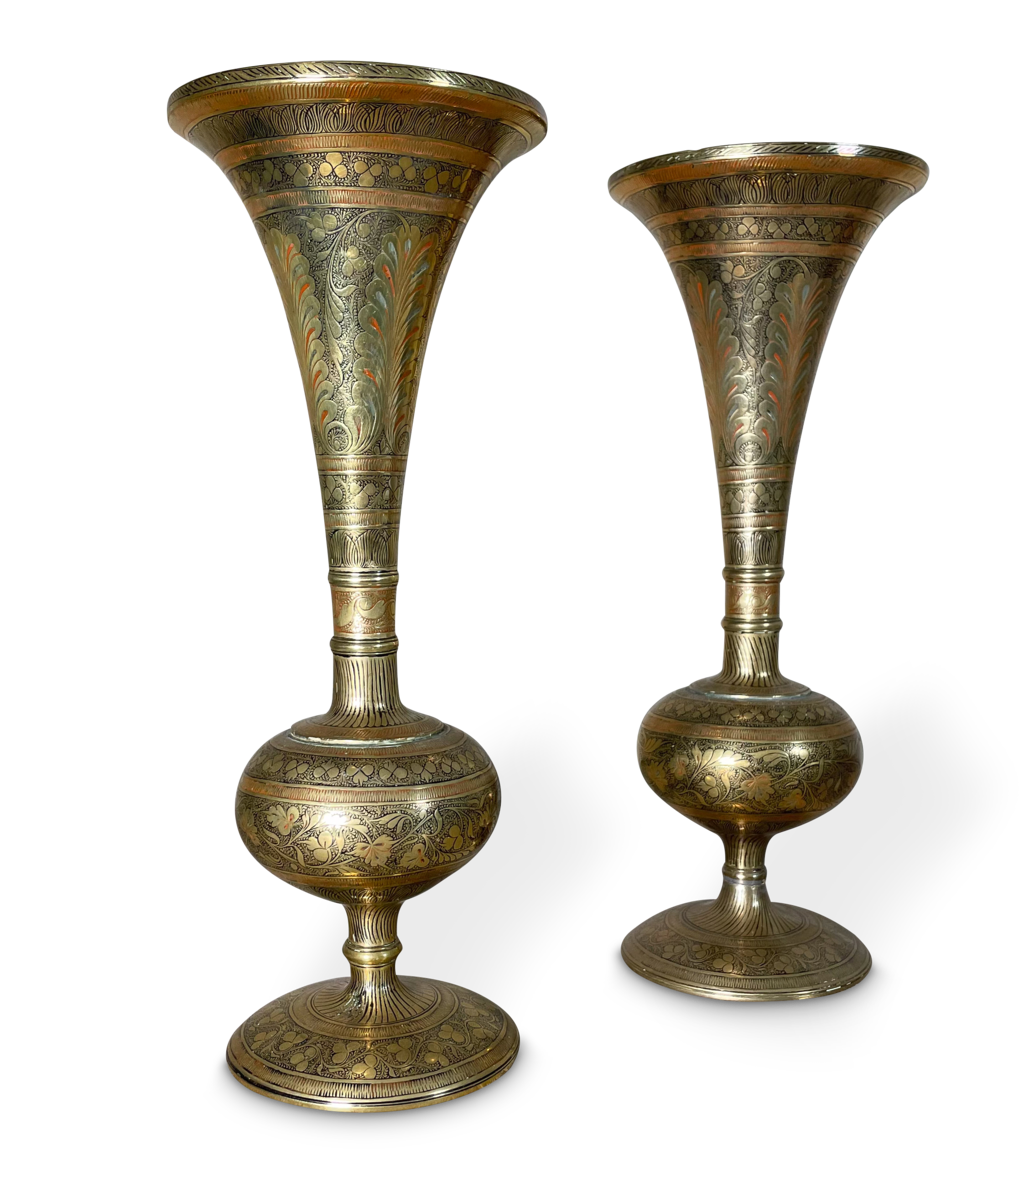 Pair of Chase Engraved Indian Brass Trumpet Neck Vases